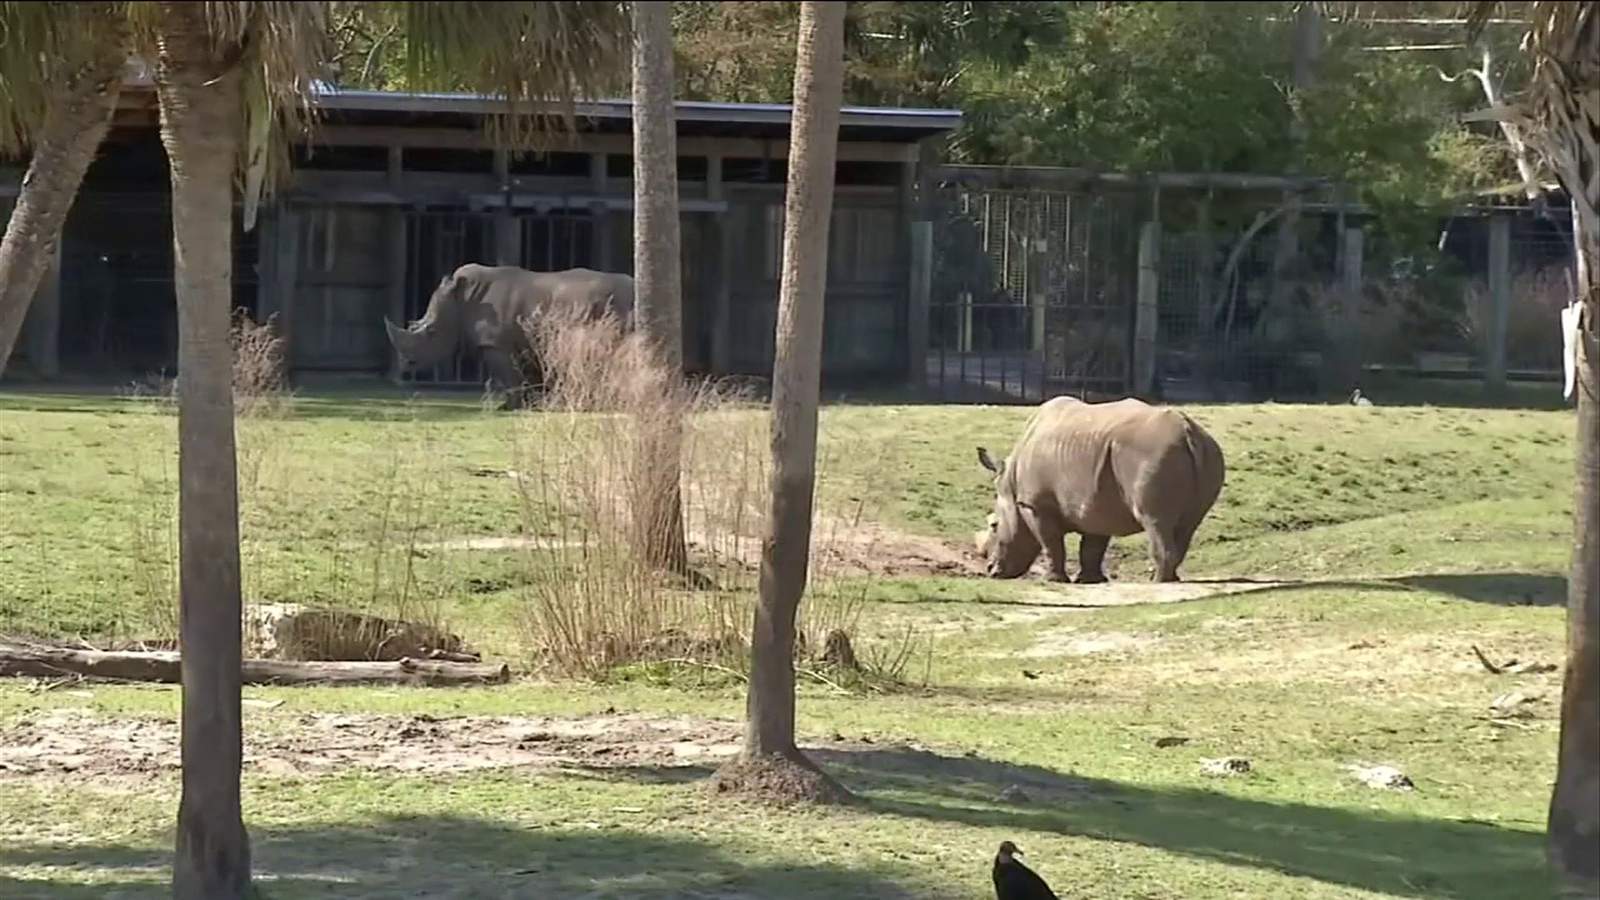 What to expect when heading to the Jacksonville Zoo this weekend